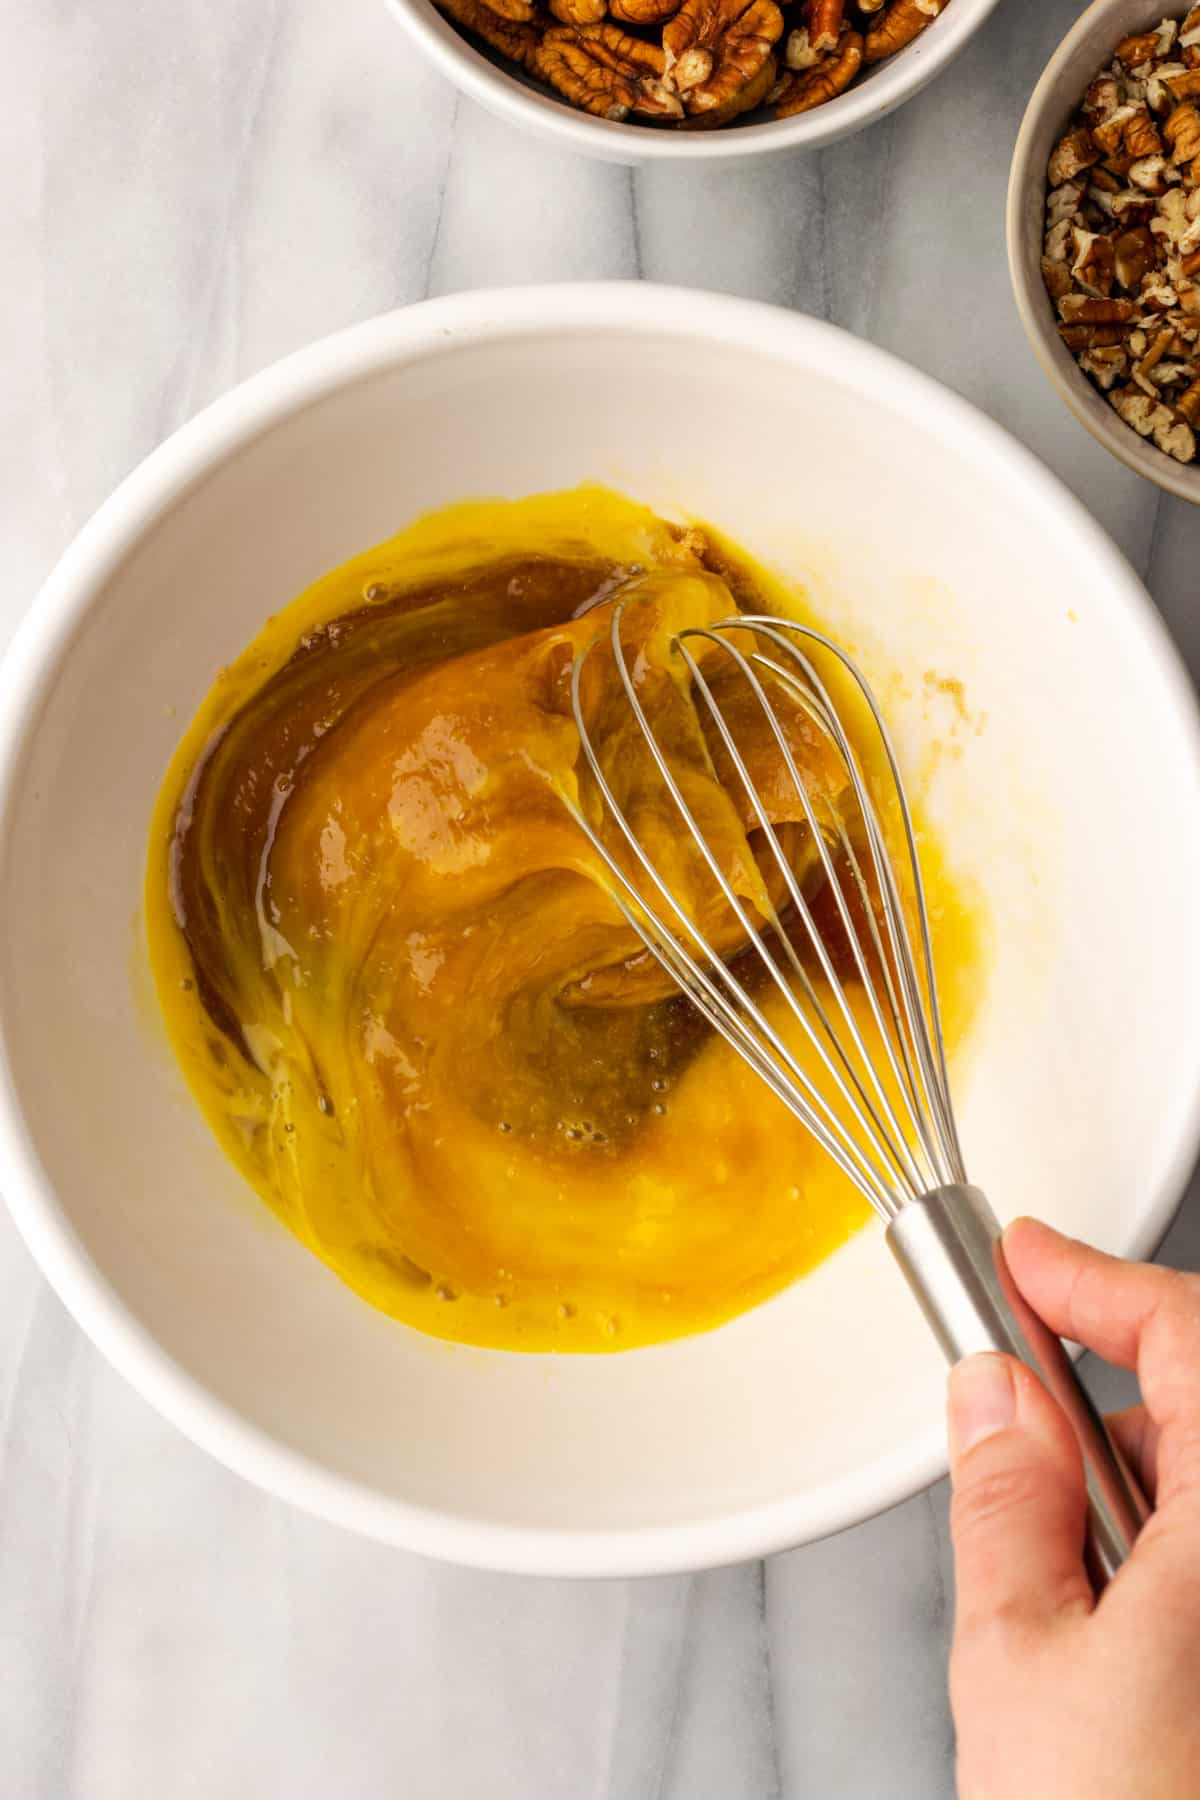 Pecan pie filling being whisked together in a large white bowl.